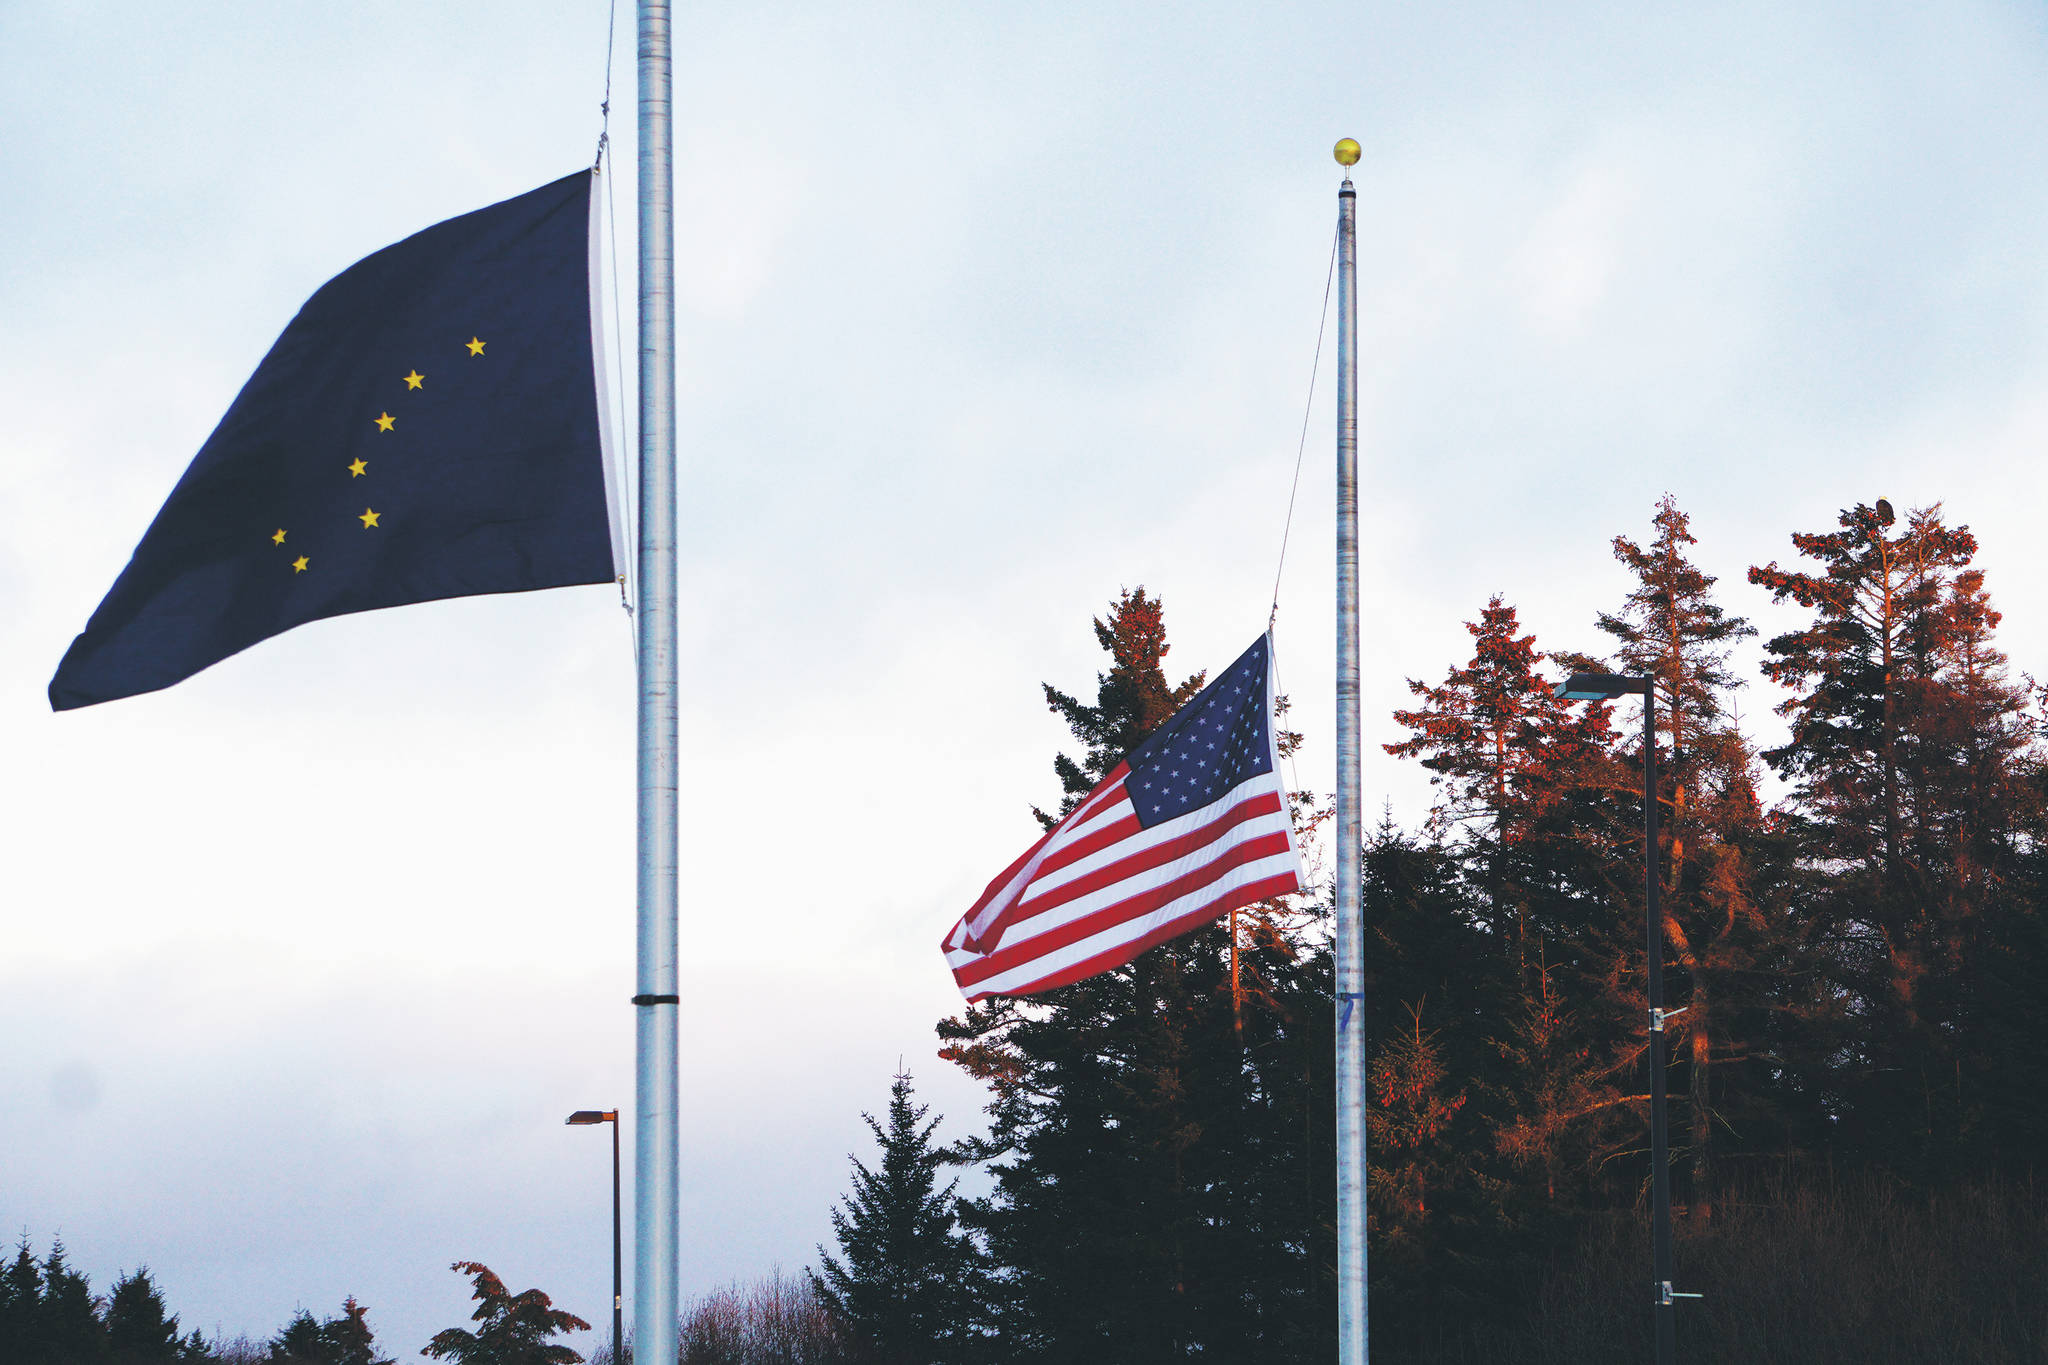 The Alaska and U.S. flags fly at half staff on Monday, Feb. 22, 2021, at the Alaska Islands and Ocean Visitor Center in Homer, Alaska. President Joe Biden on Monday ordered flags to be flown at half staff at federal facilities for five days to honor the 500,000 Americans who have died of COVID-19. (Photo by Michael Armstrong/Homer News)